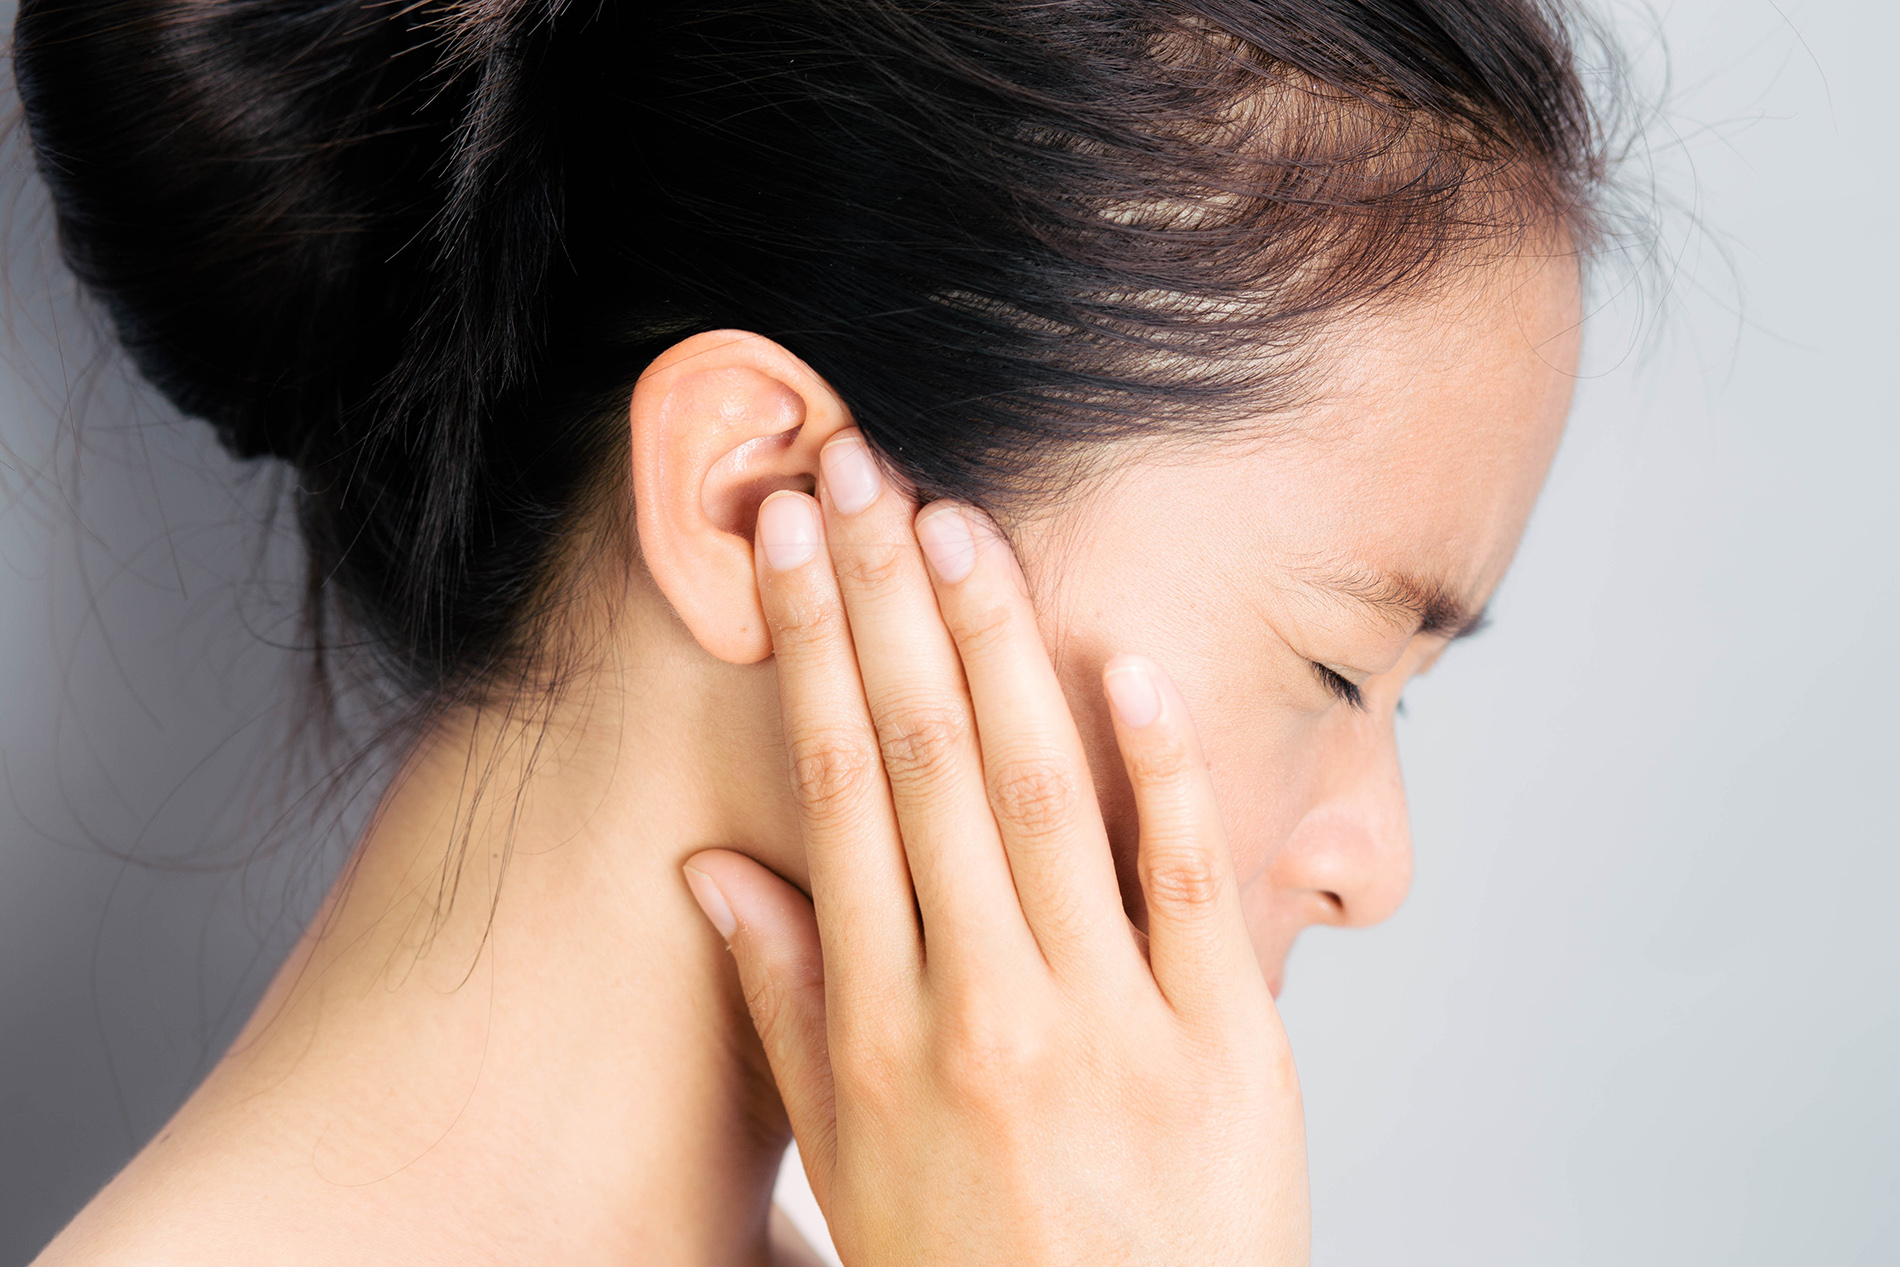 Asian woman in profile holding her hand at her ear in pain